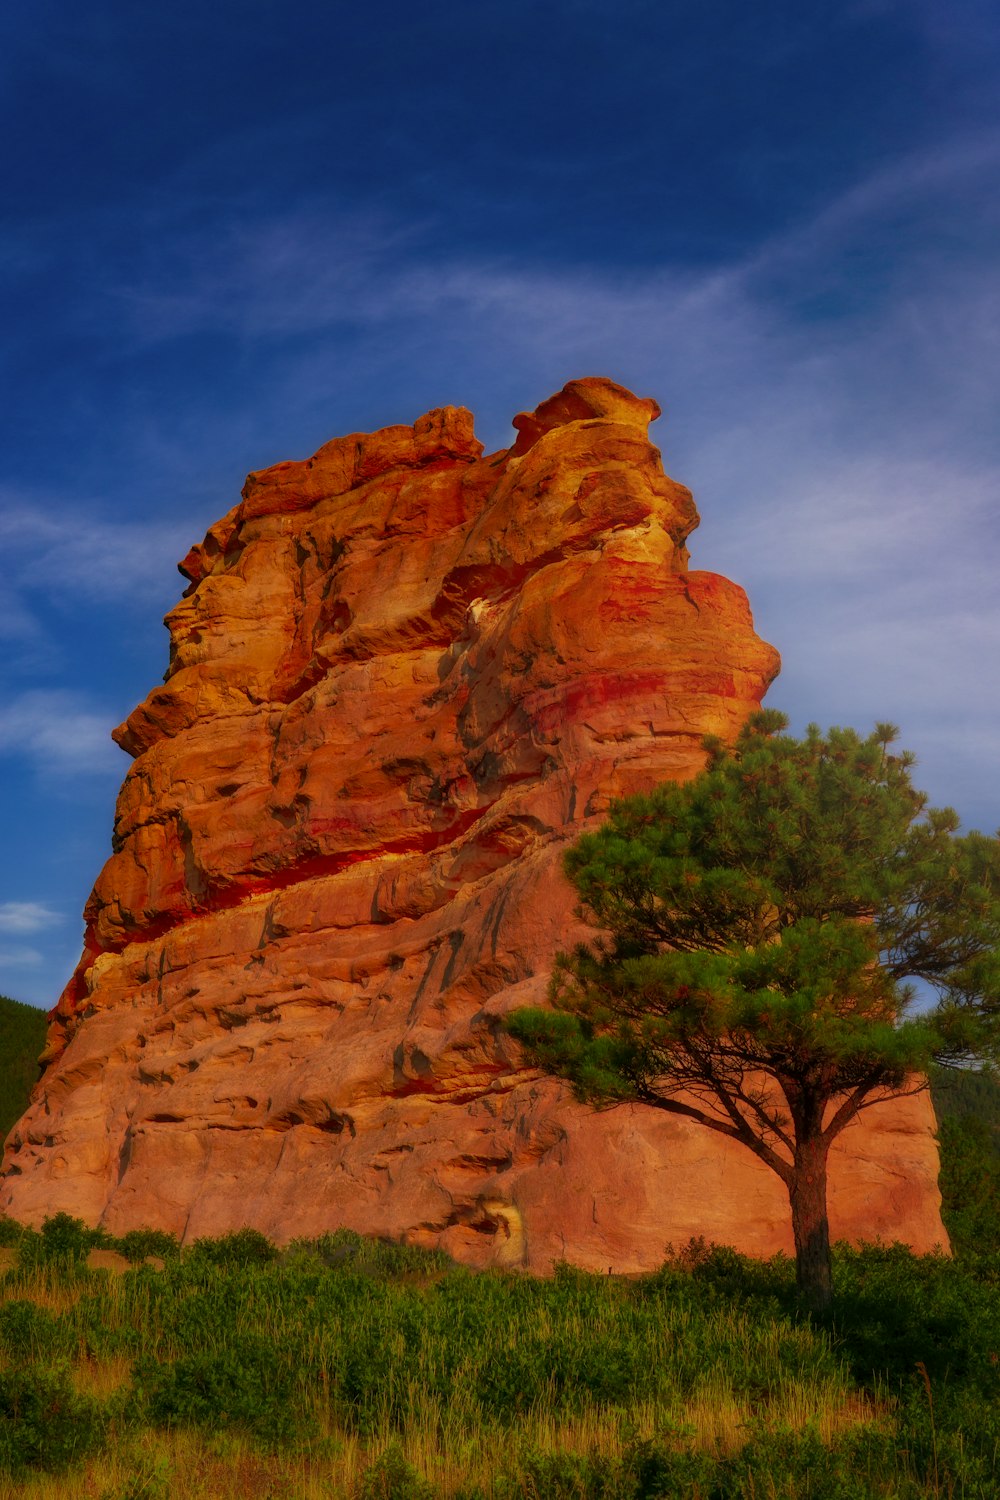 a large rock formation with a tree in the foreground